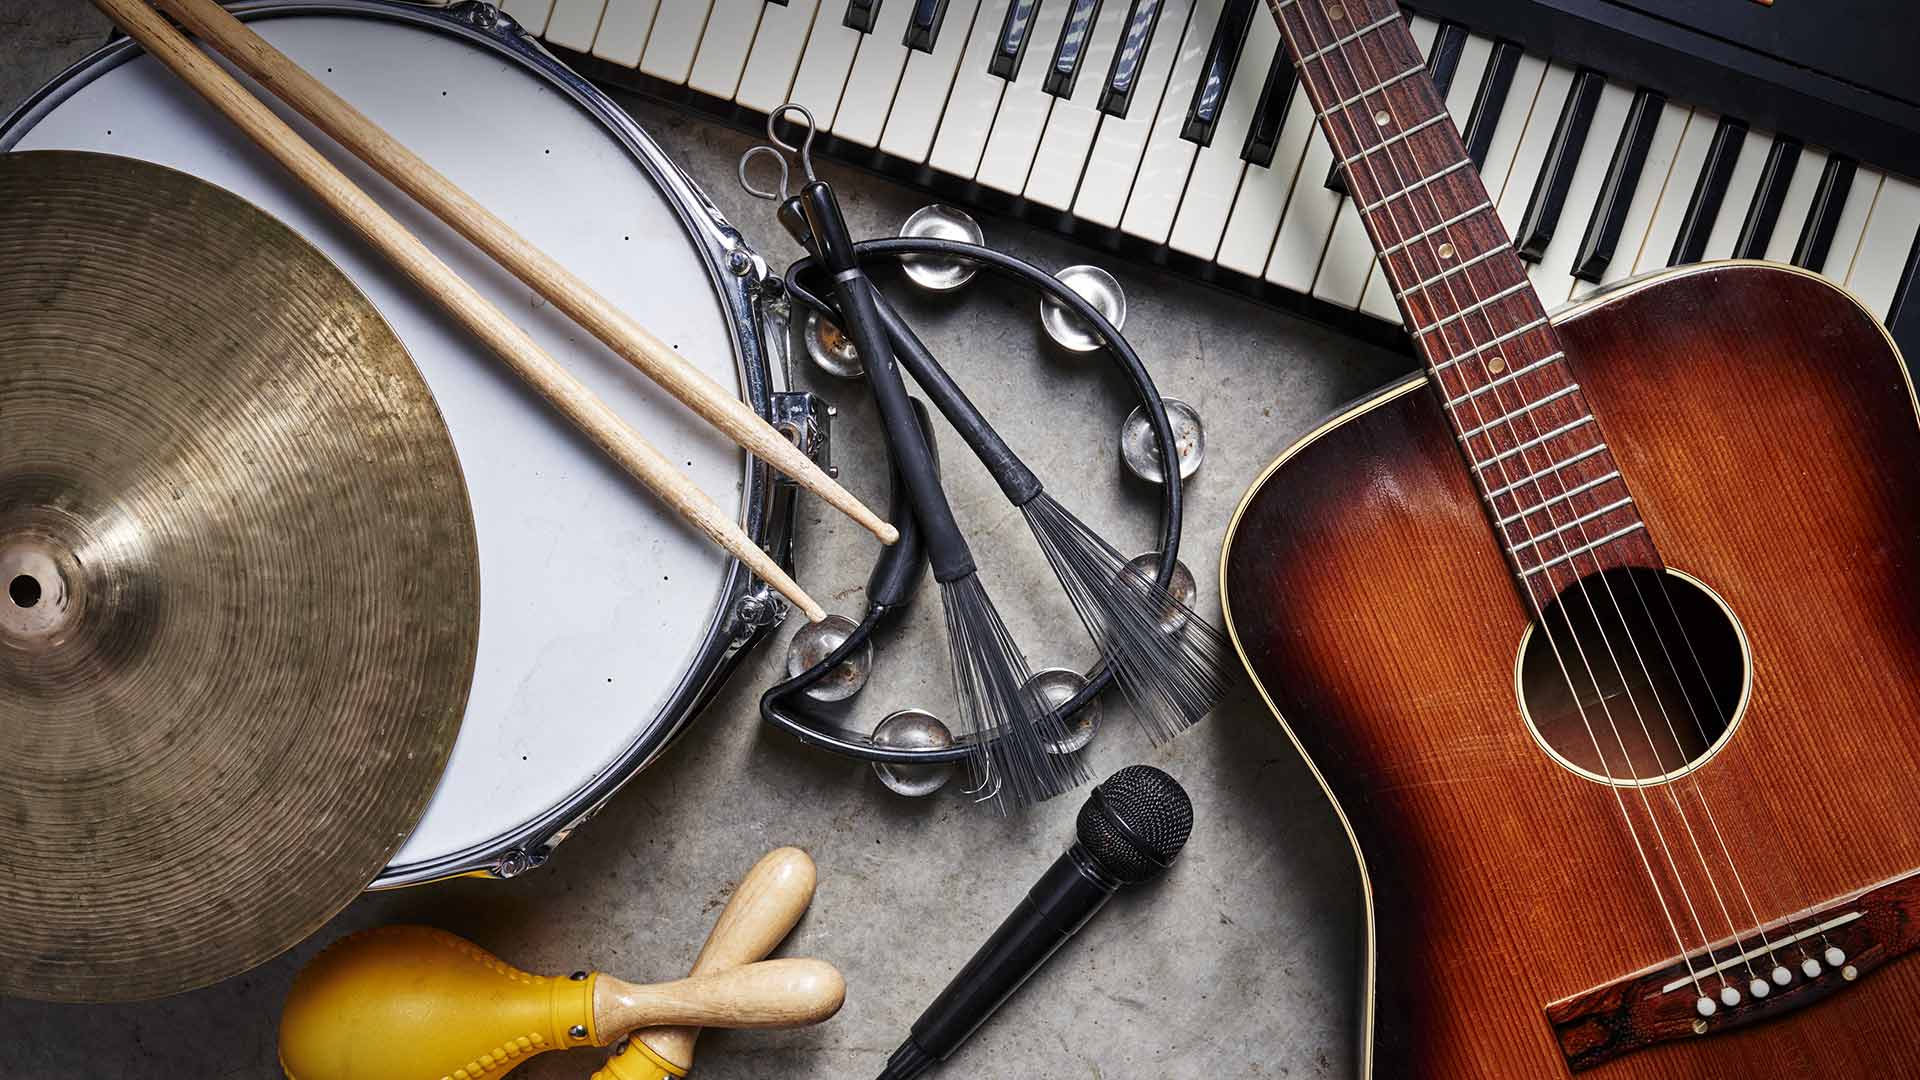 Instruments laid out on a table.